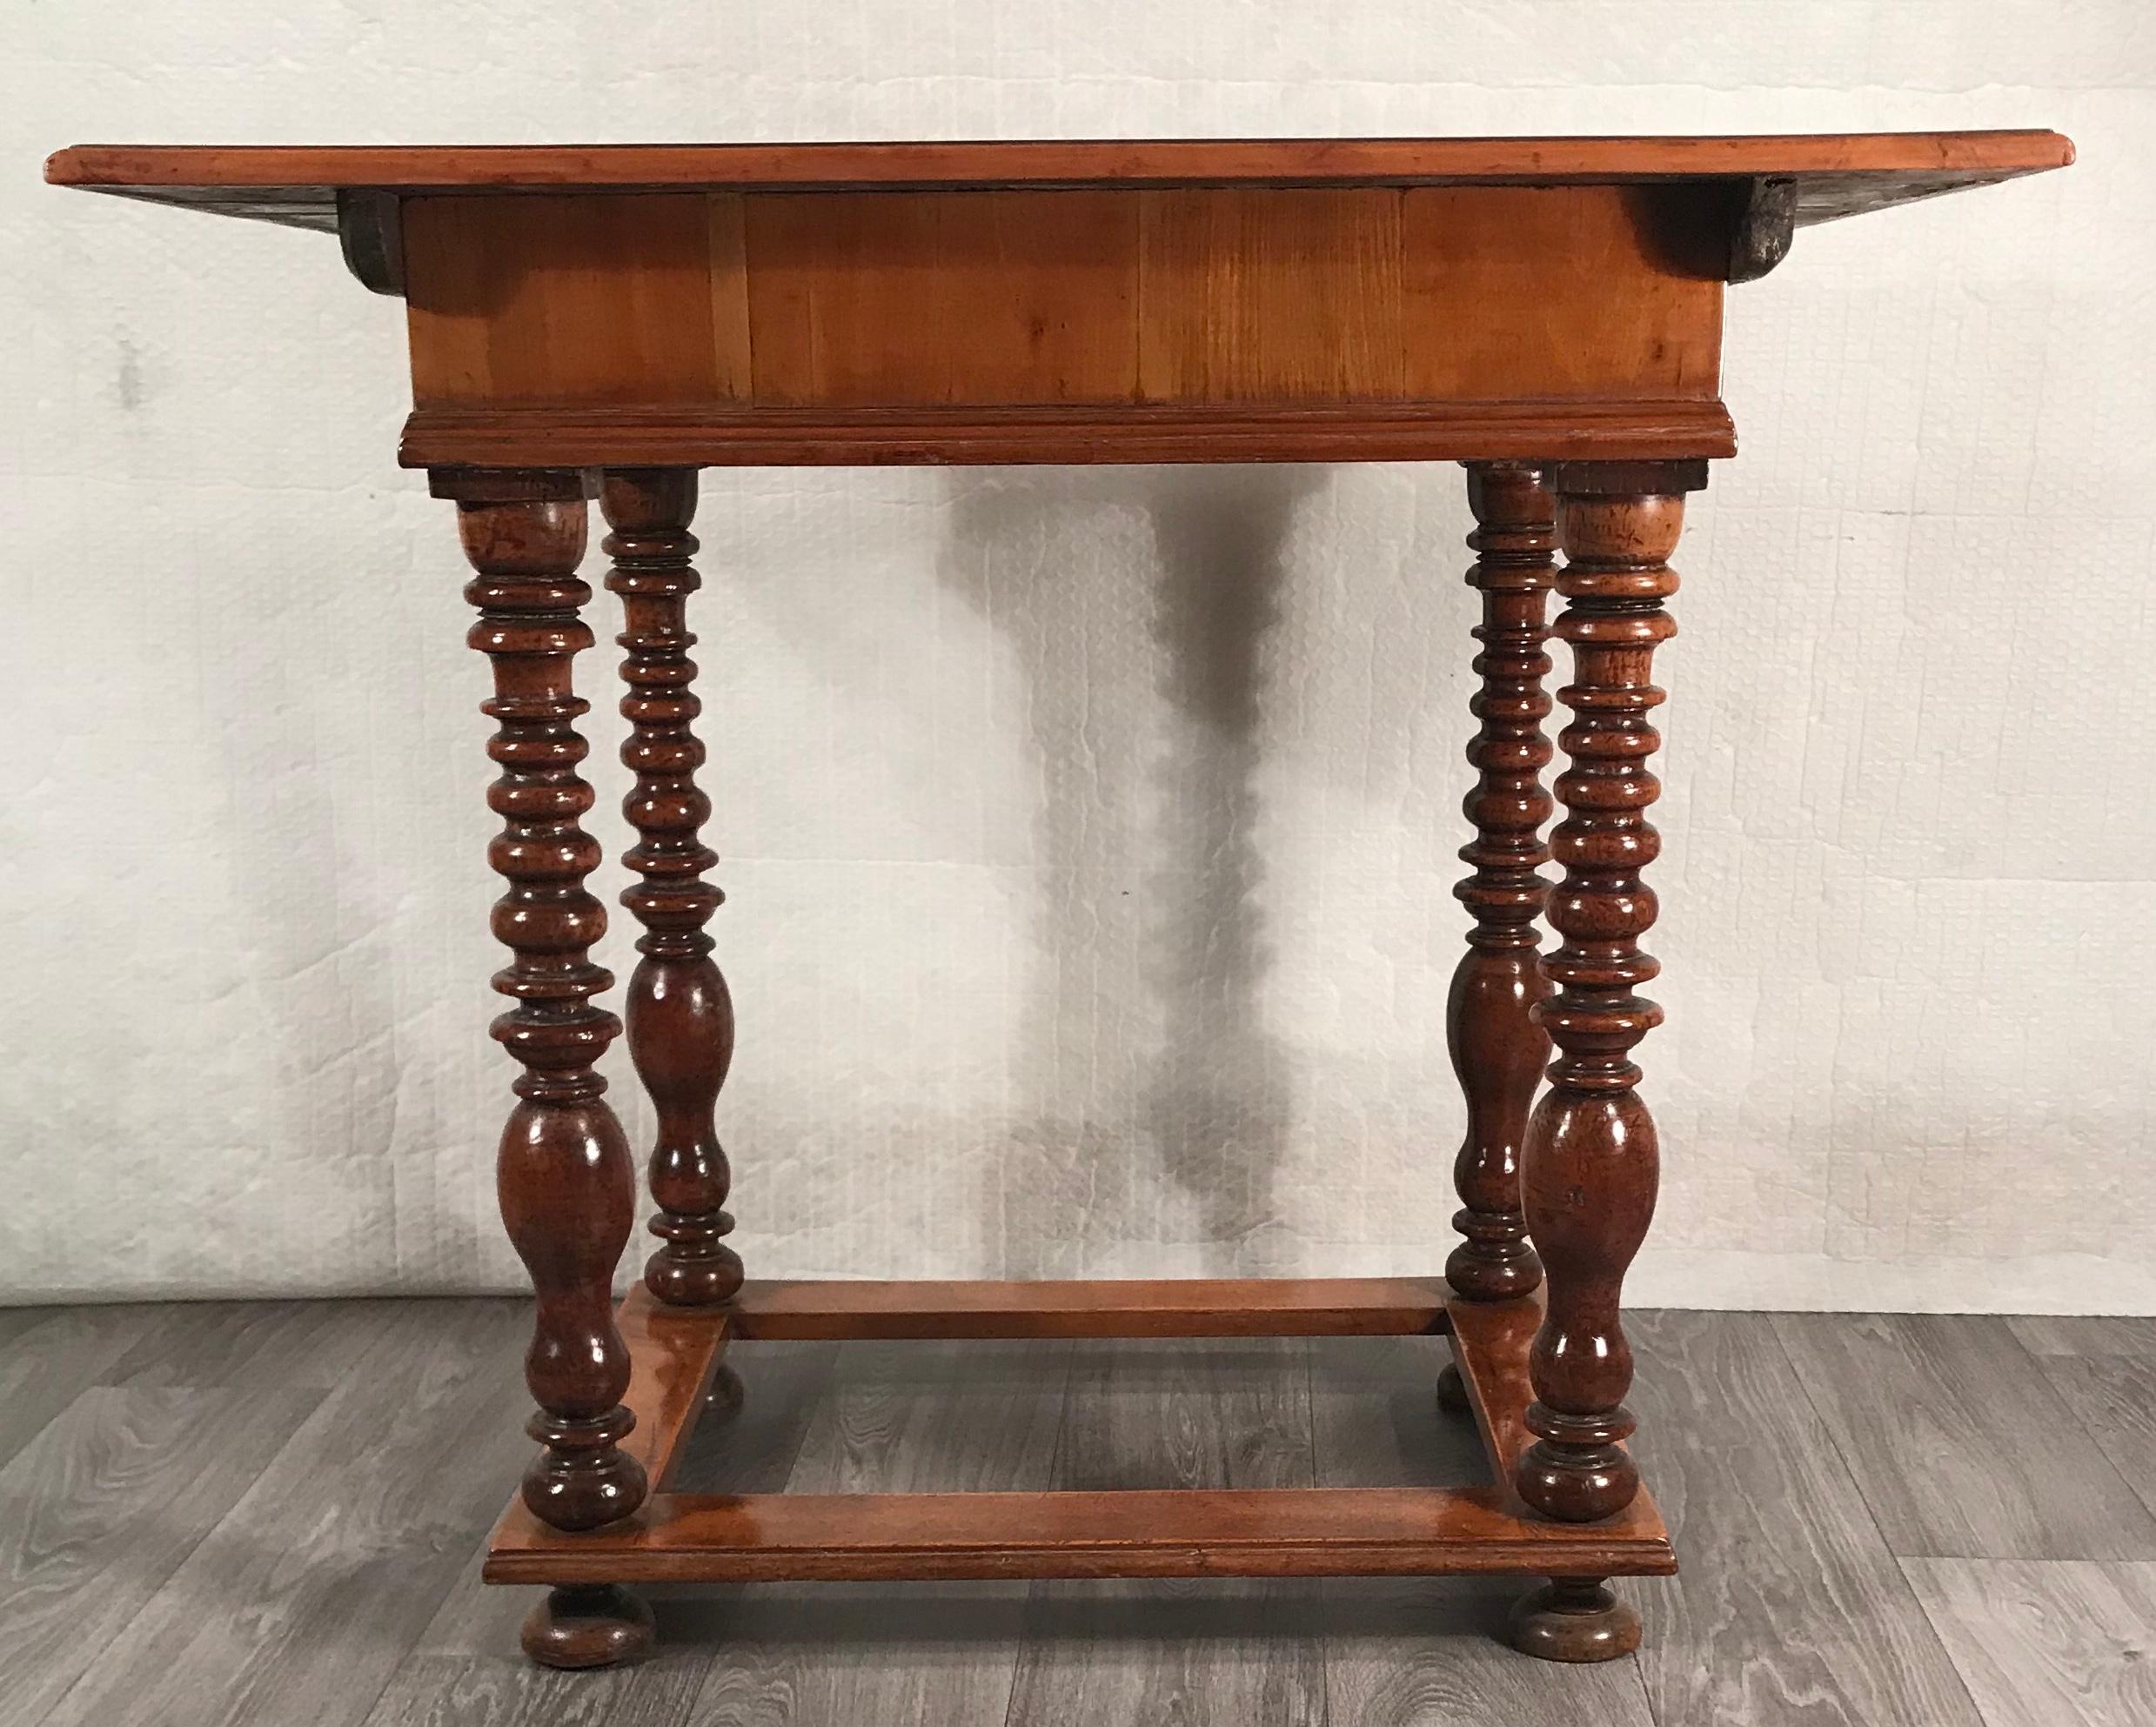 Baroque Table, Southern Germany, Augsburg Region 1750, Walnut For Sale 3